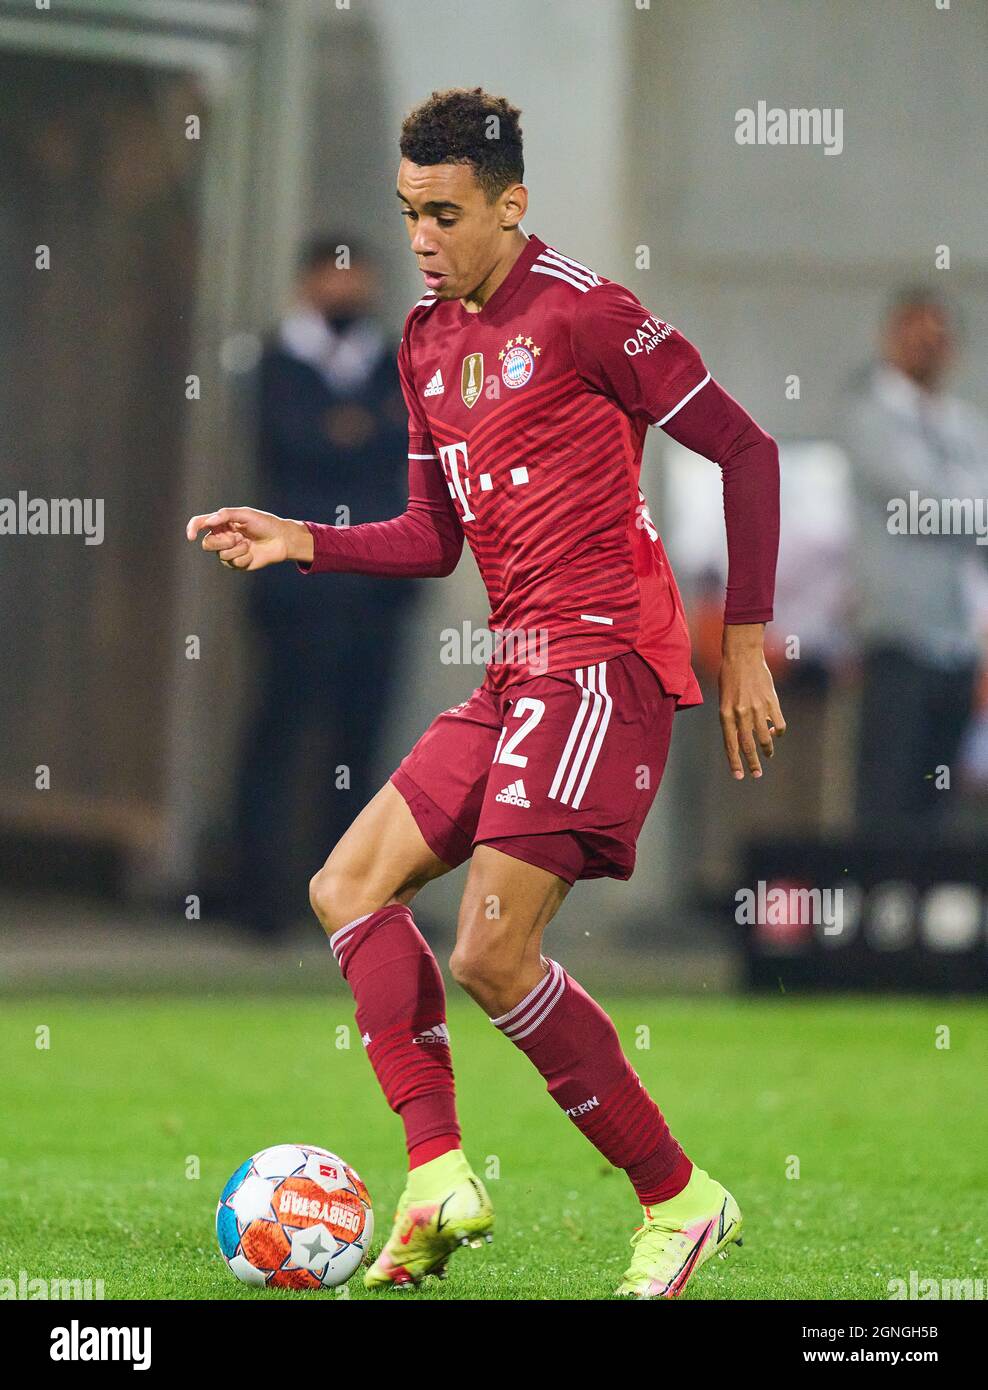 Jamal MUSIALA, FCB 42 in the match SpVgg GREUTHER FÜRTH